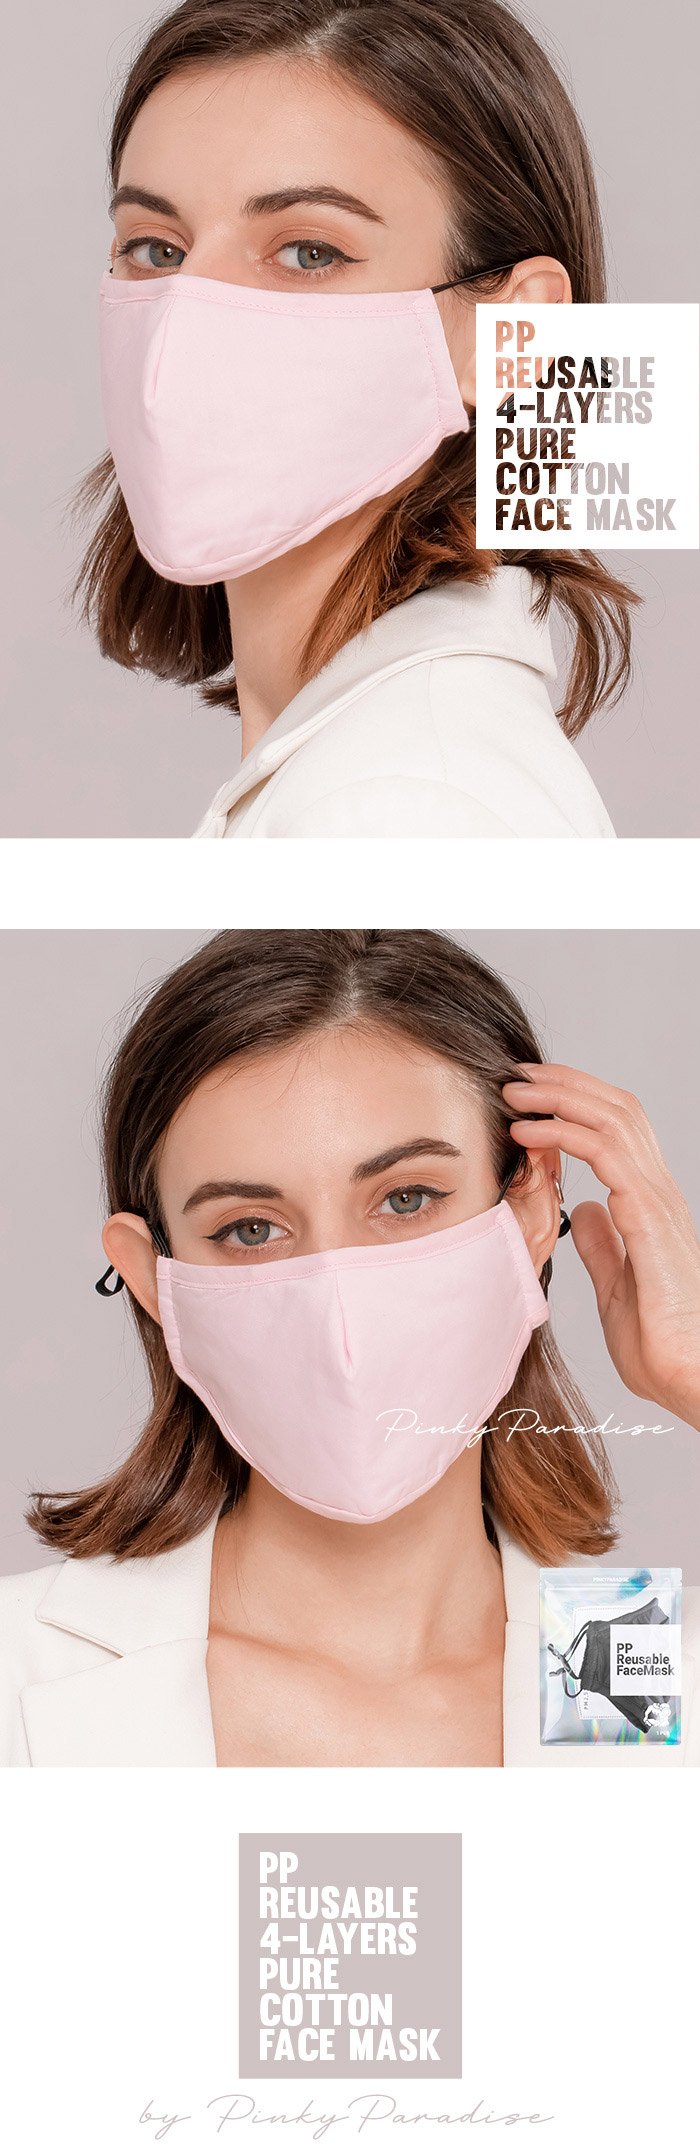 PP Reusable 4 layers Pure Cotton Face Mask in pink color